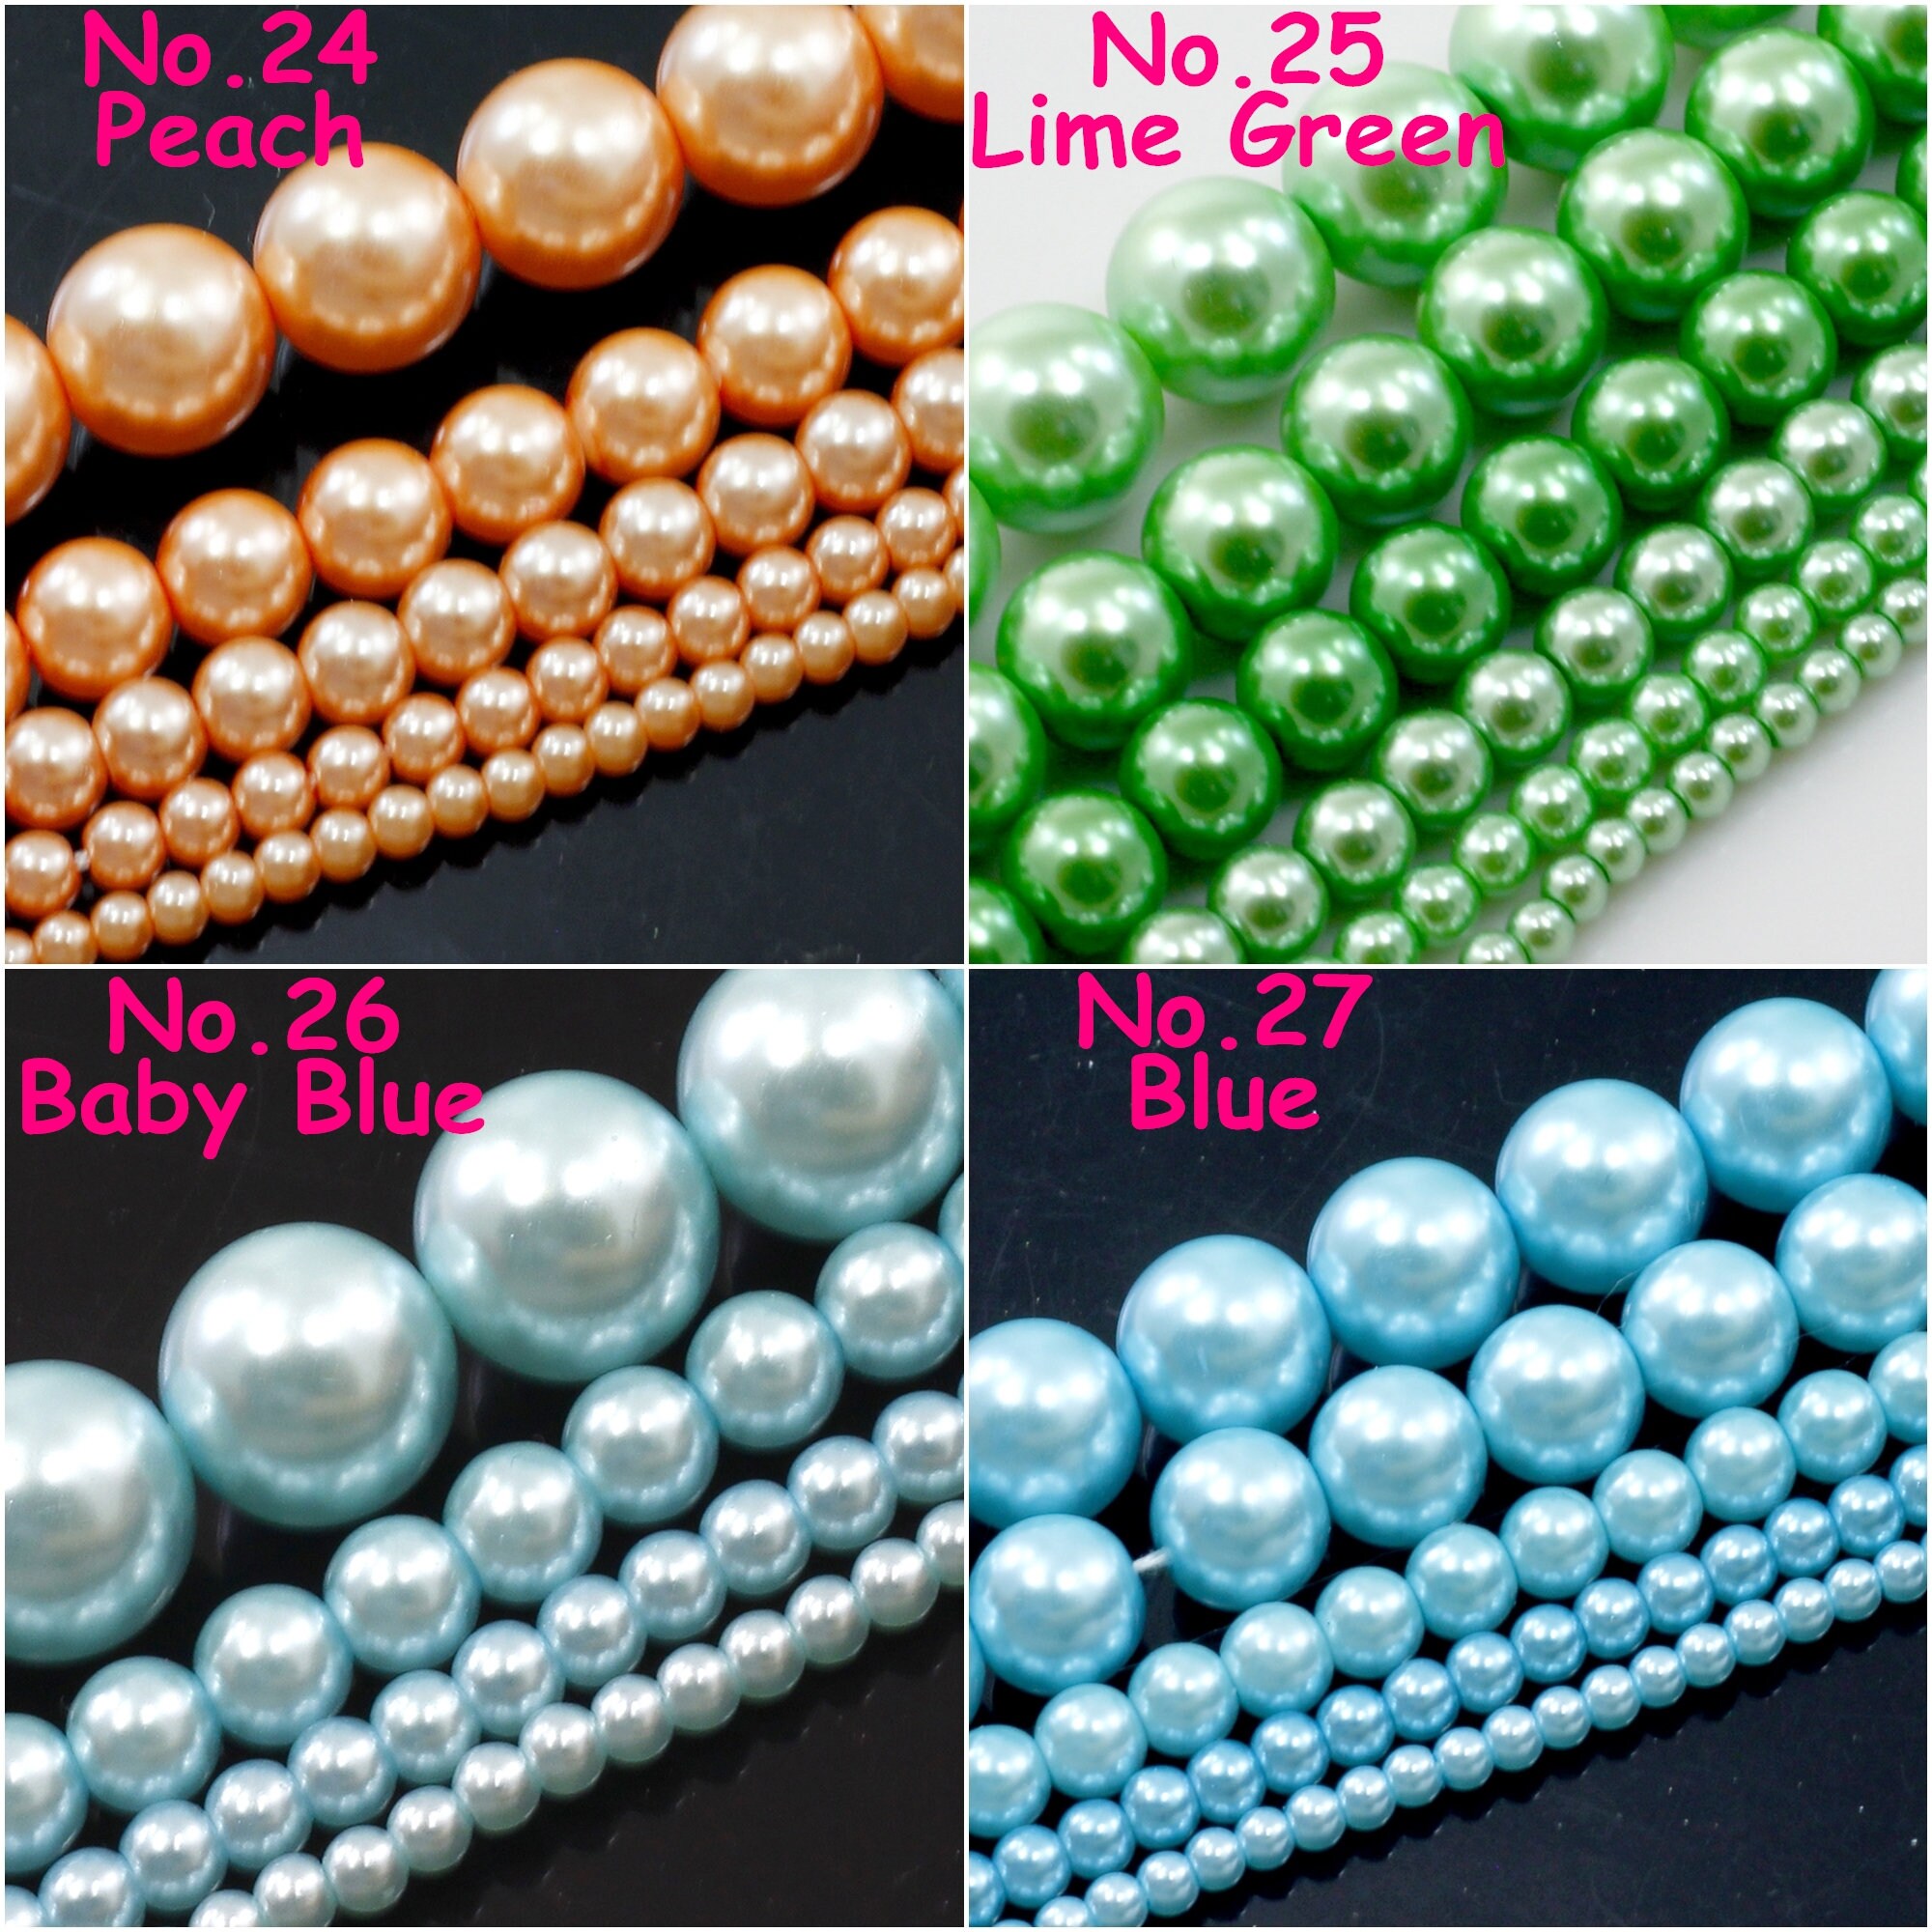 3mm Glass Pearl Beads 15 Strand 3mm Round Beads Pearl Jewelry Wedding Pearl  Jewelry Making Supplies Necklace, Bracelet, Earrings -  Canada